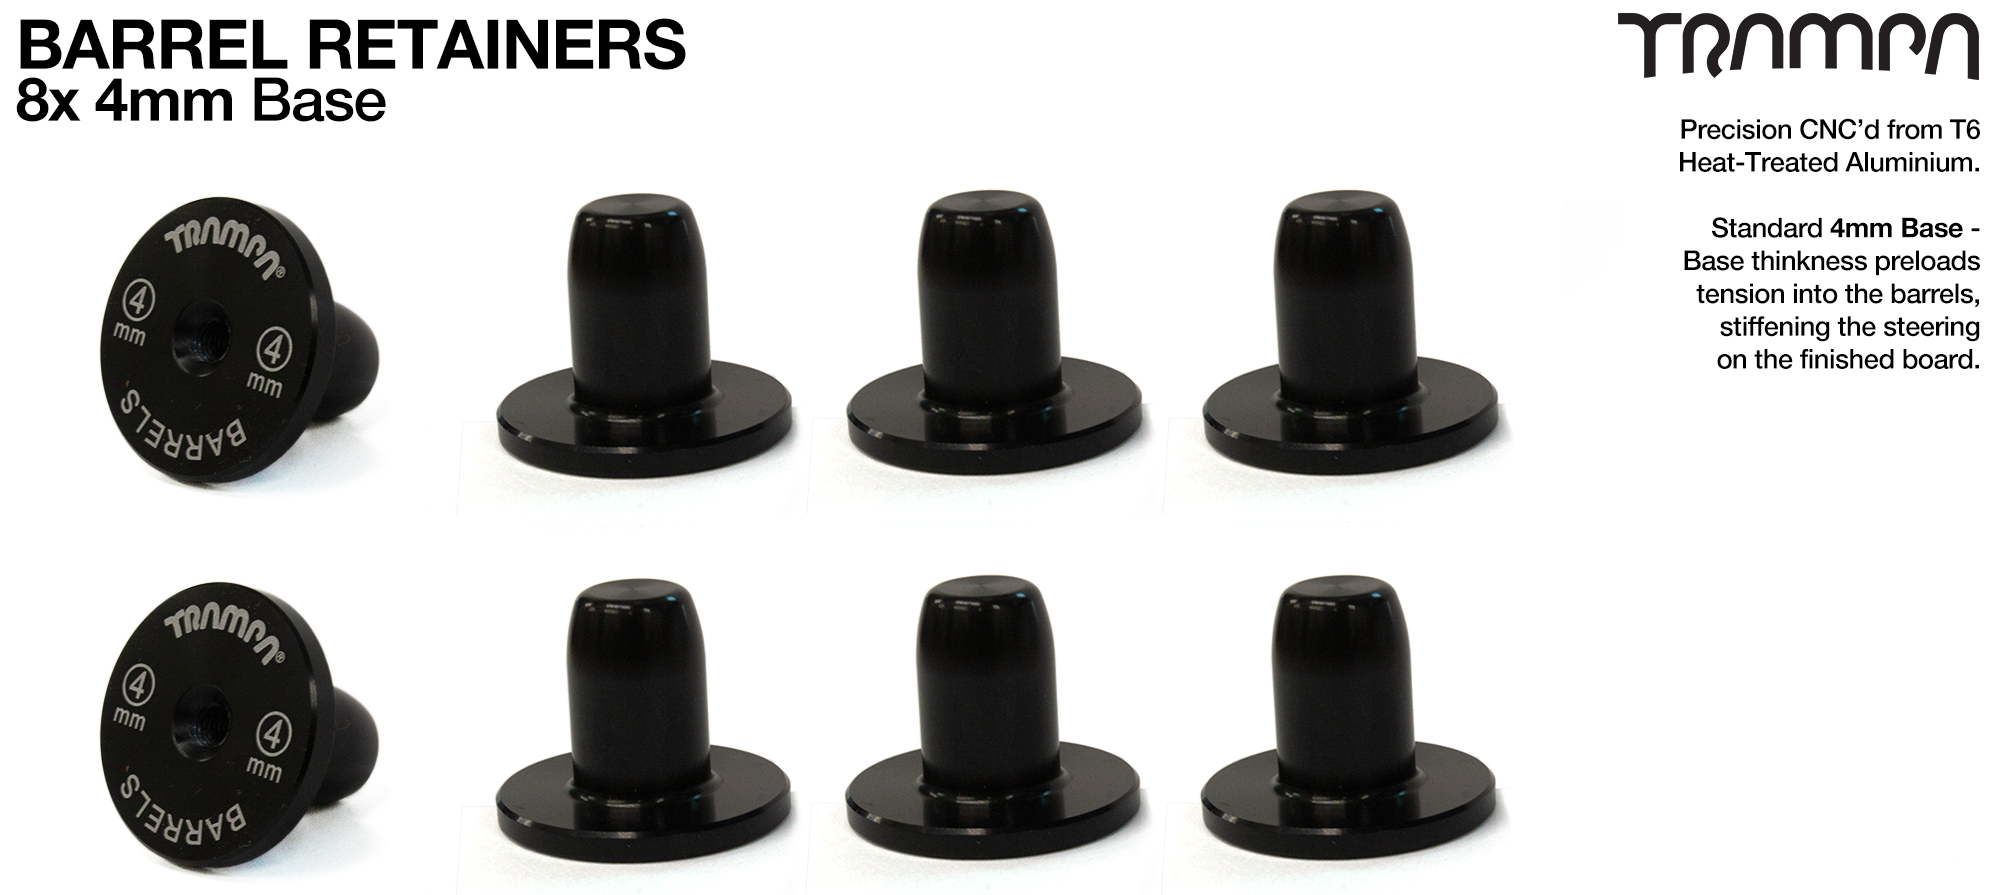 TRAMPA Barrel Retainers x8 with 4mm Base 